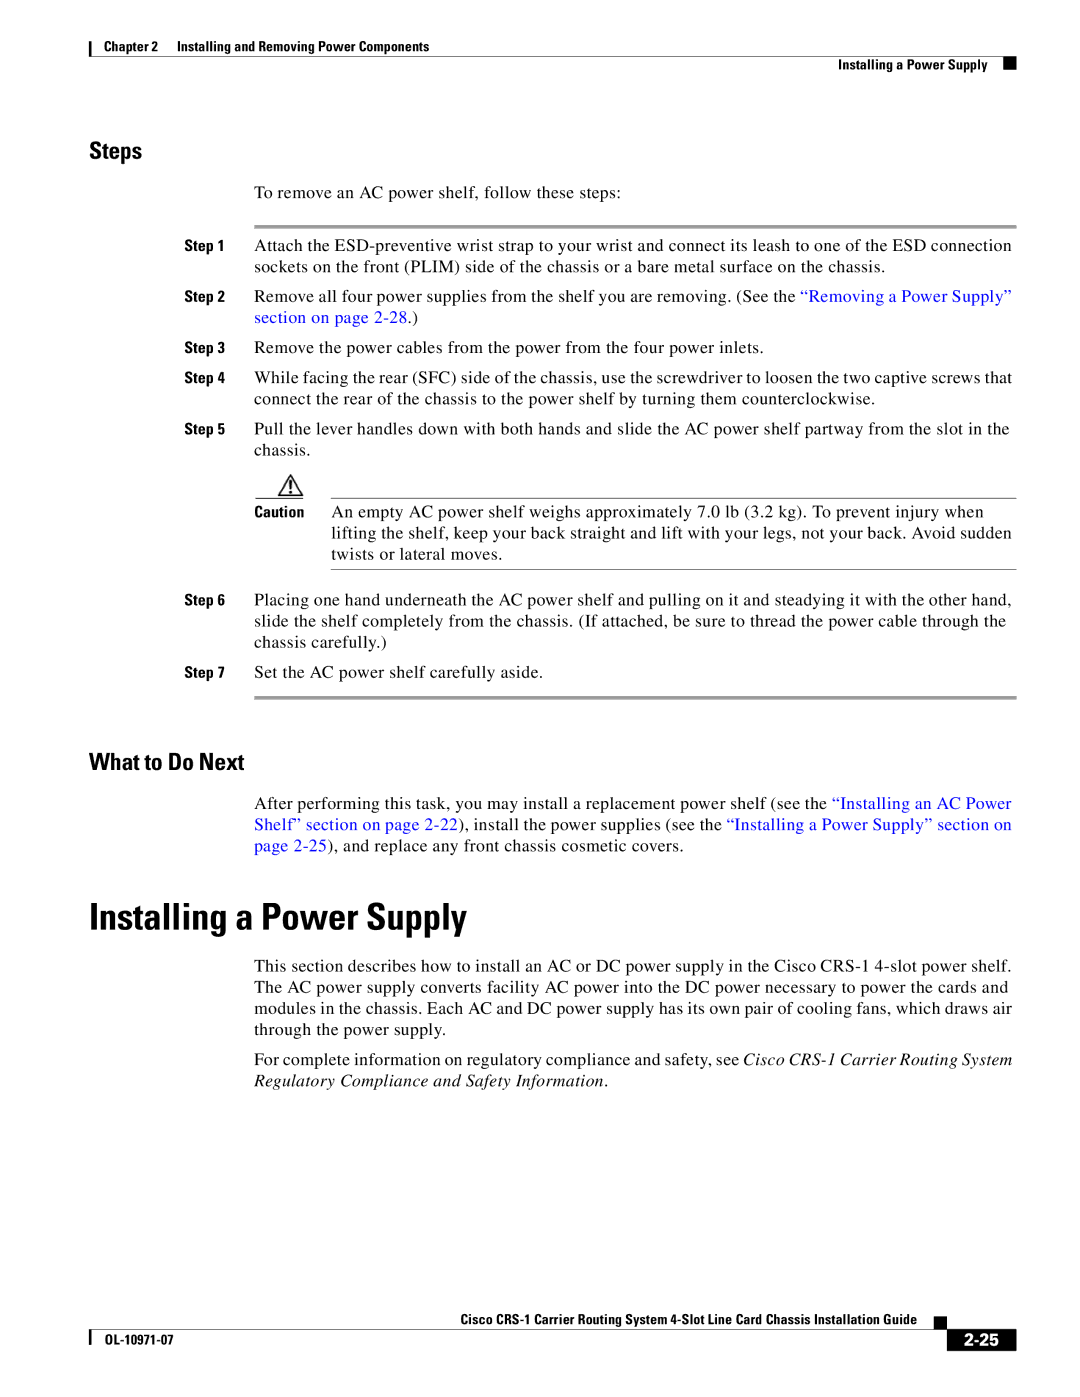 Cisco Systems Cisco CRS-1 manual Installing a Power Supply 